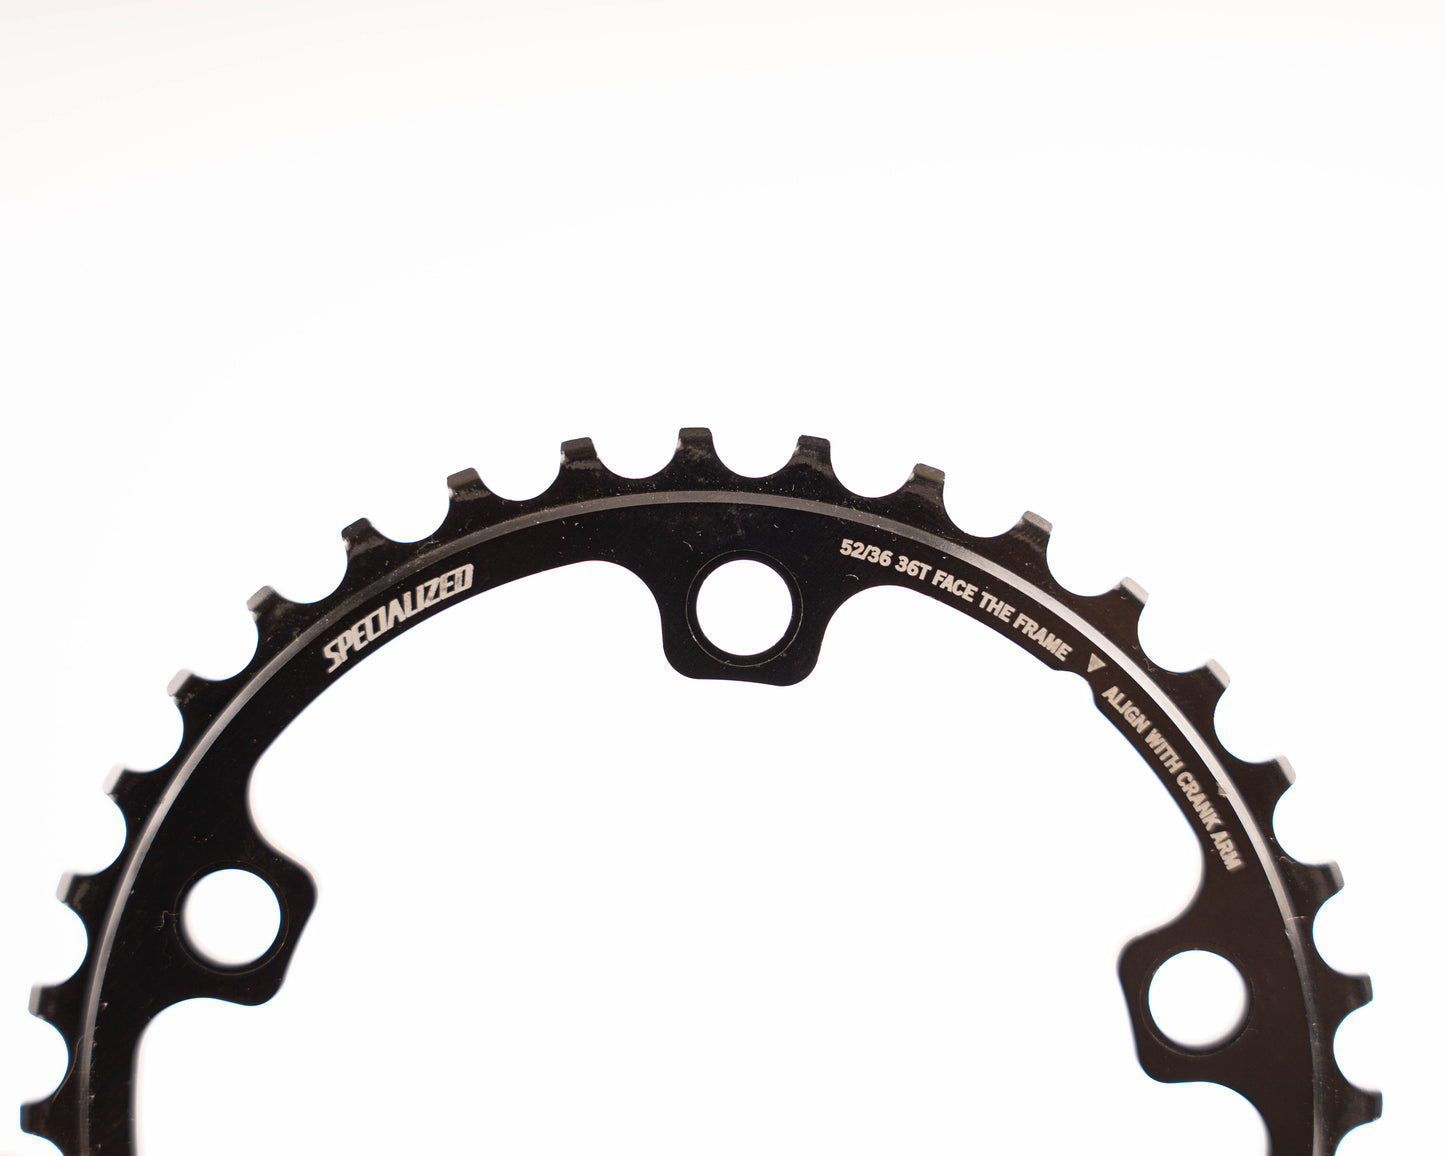 Specialized Chainring 36Tx110 5-Bolt Blk